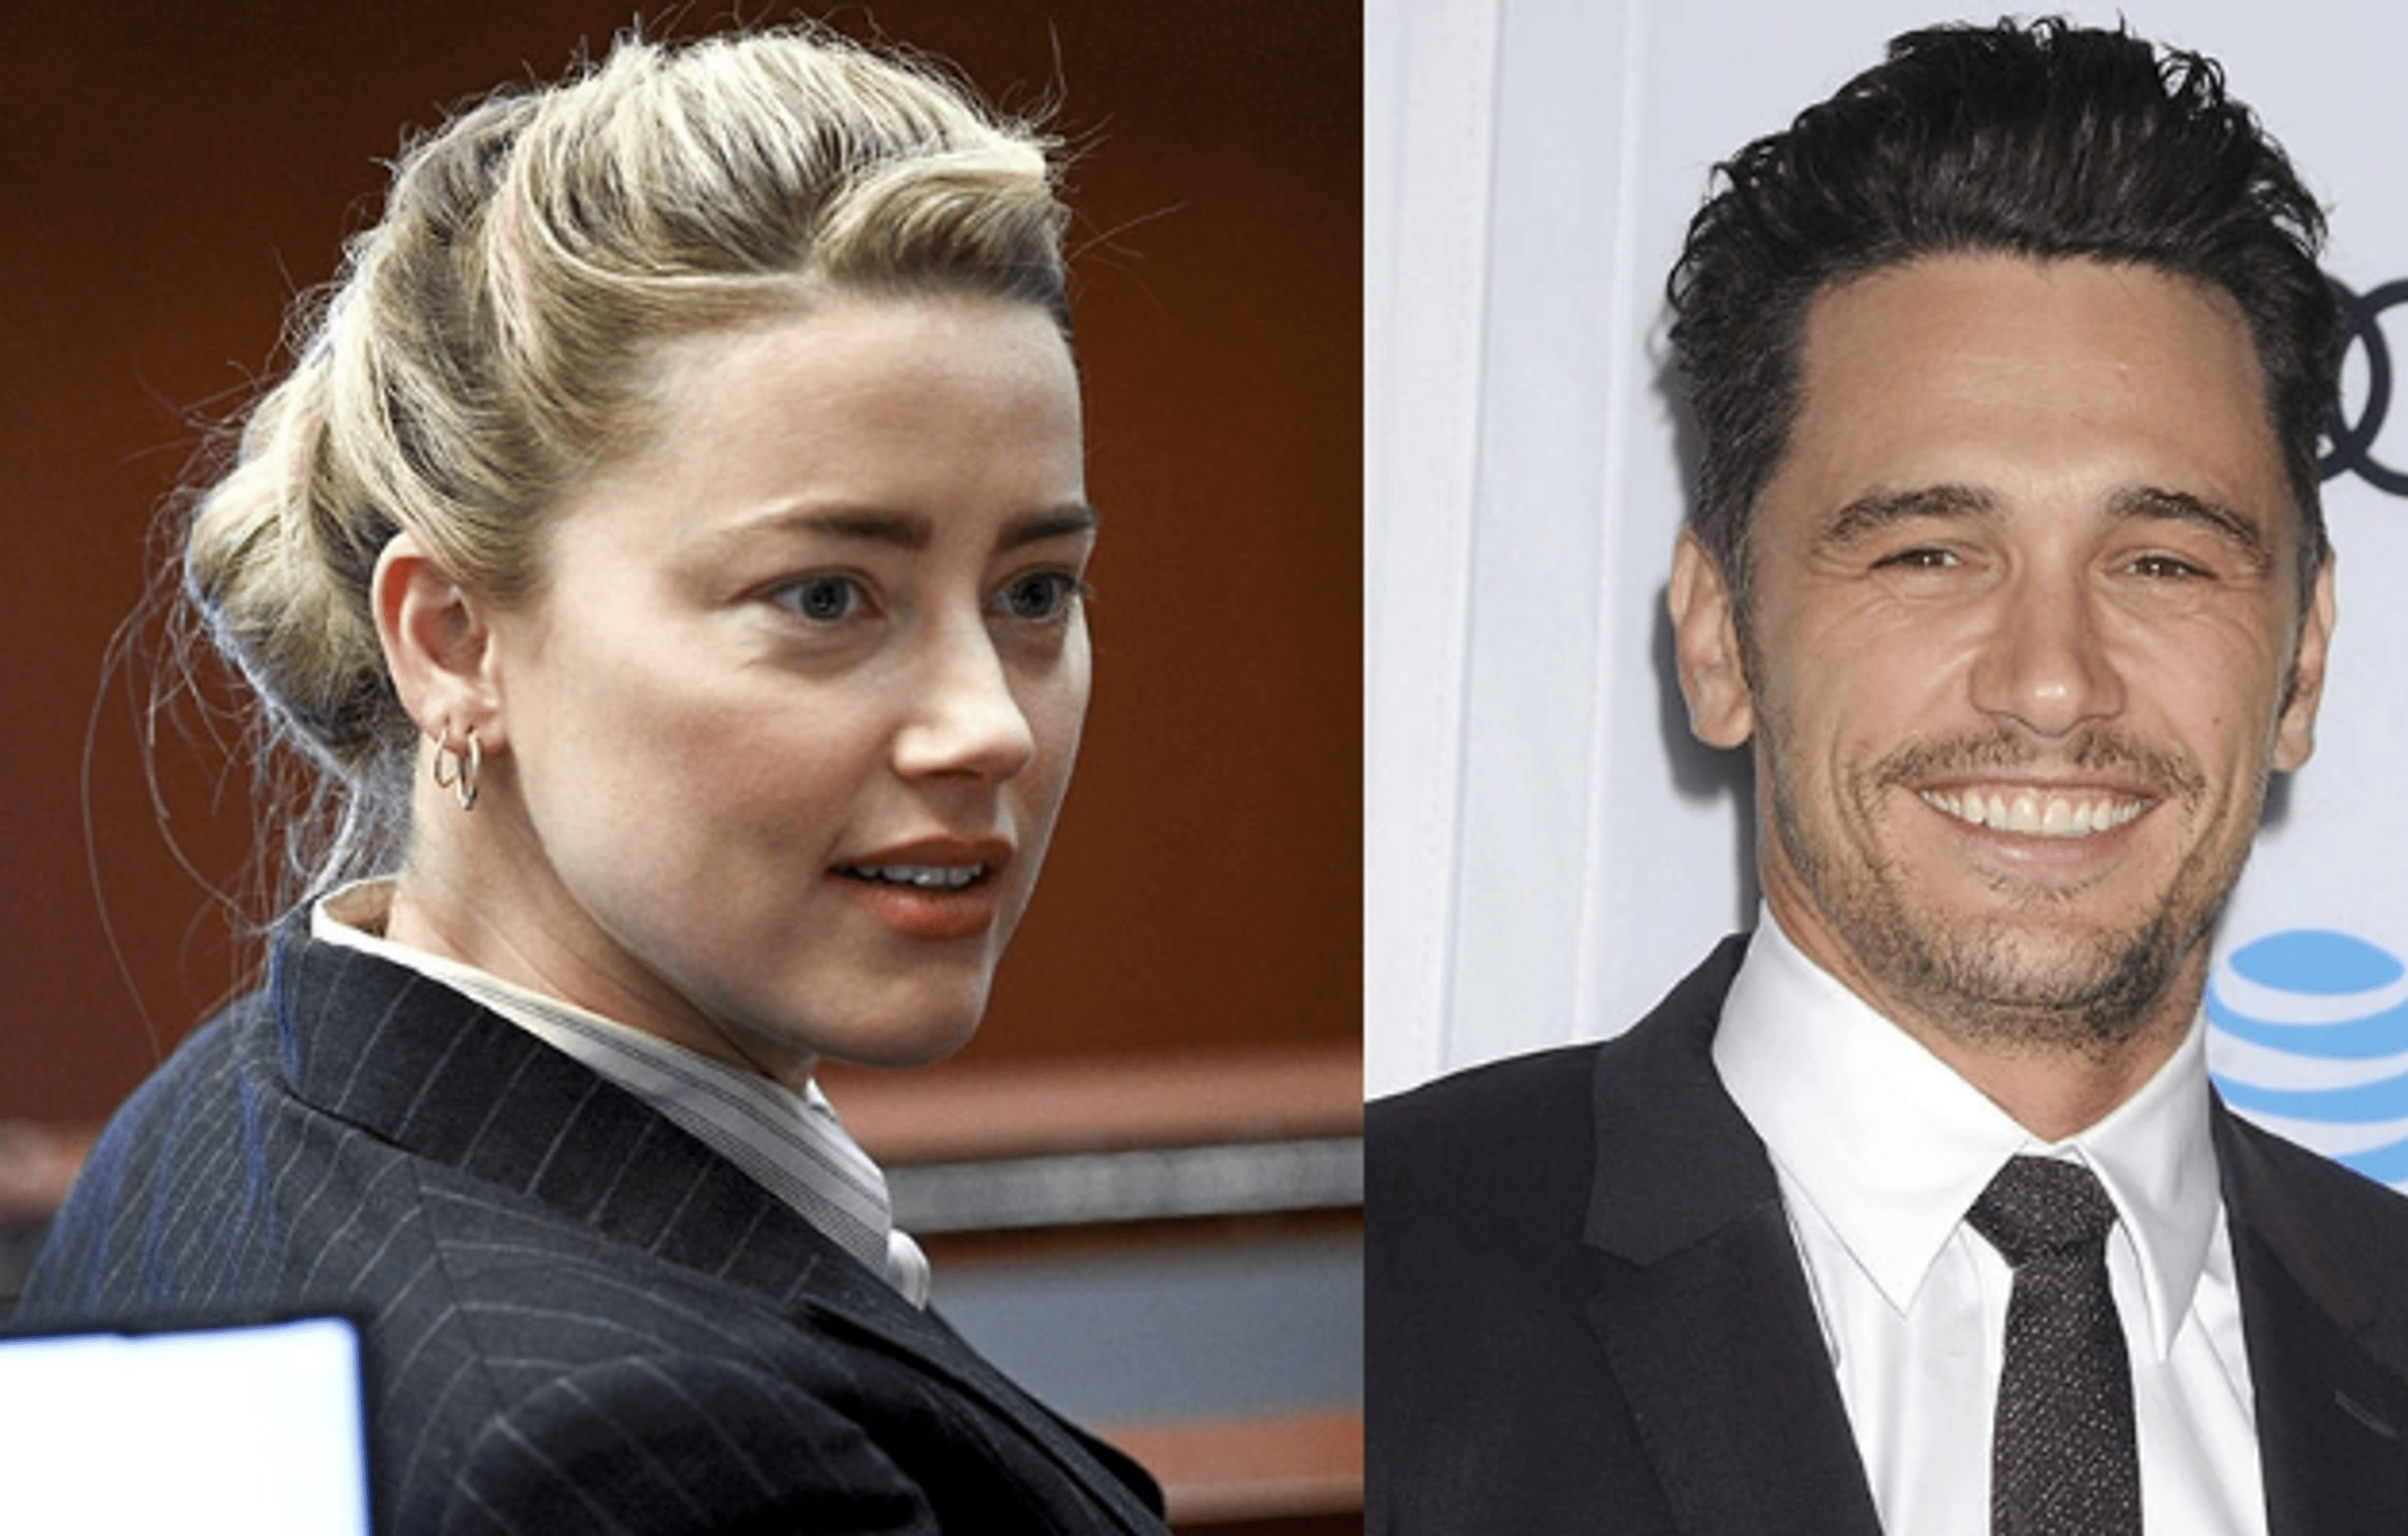 ”amber-heard-had-commented-on-the-rumors-about-the-affair-with-james-franco-when-she-was-married”